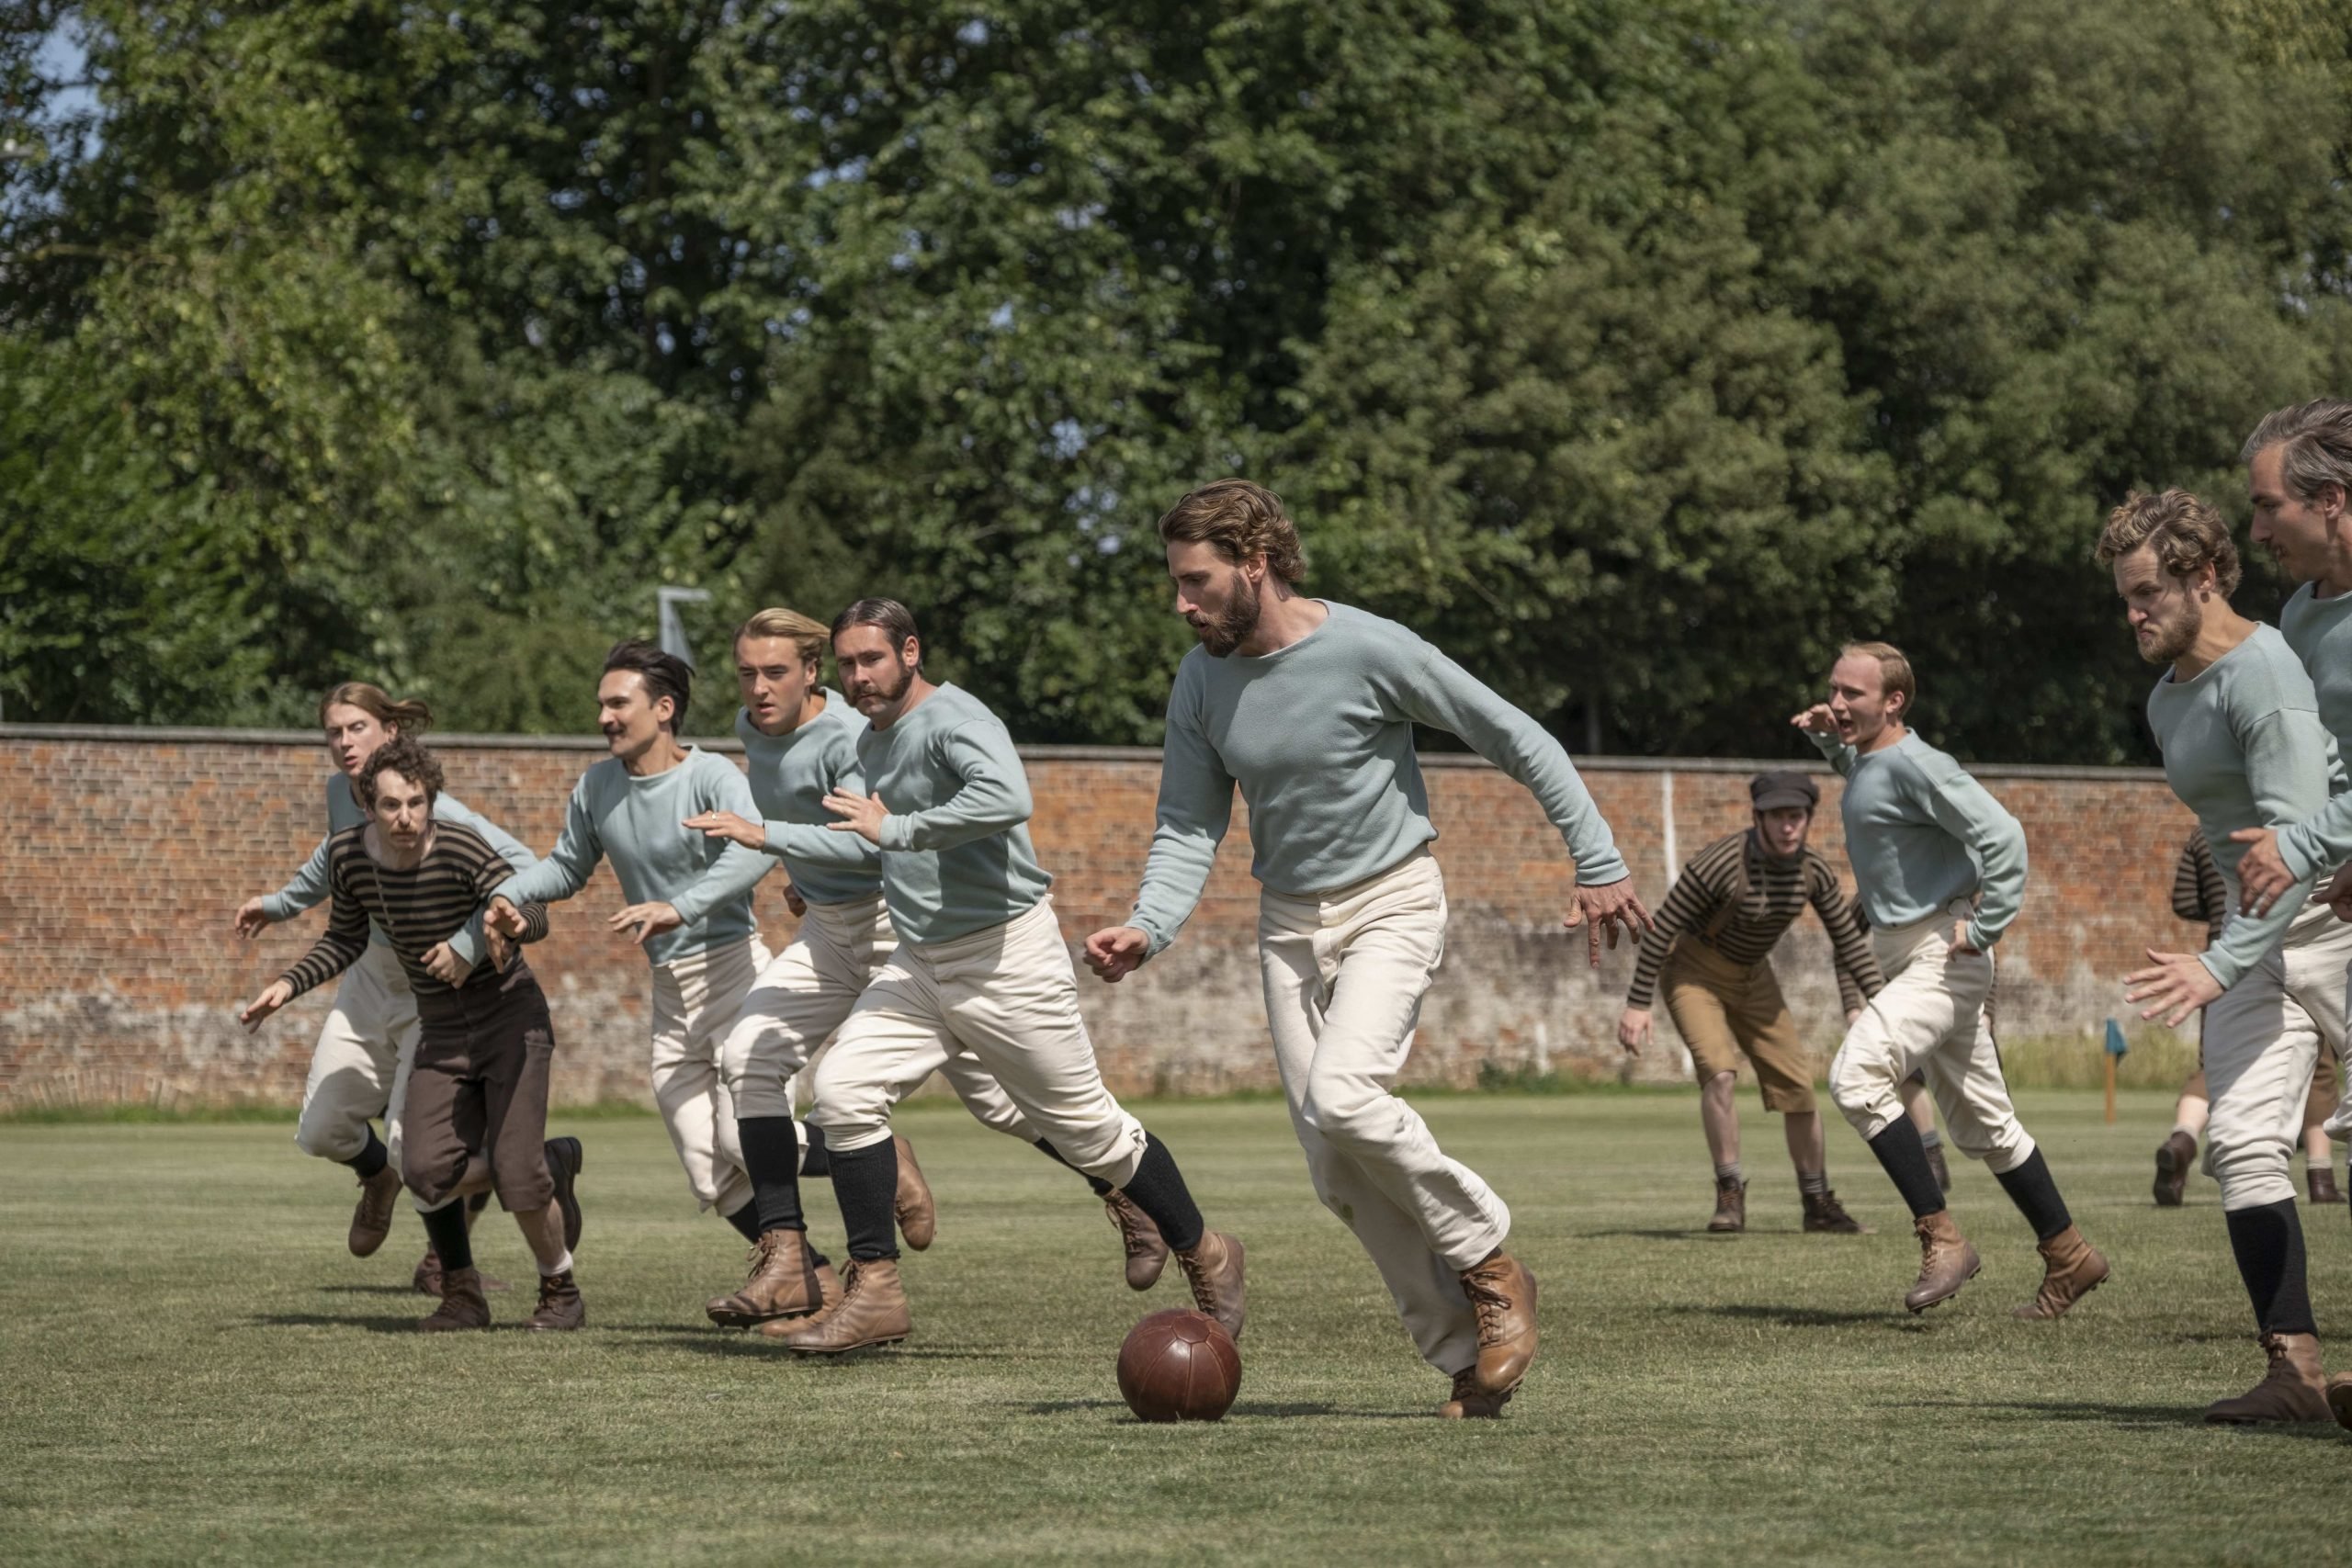 Men playing soccer in 'The English Game' 